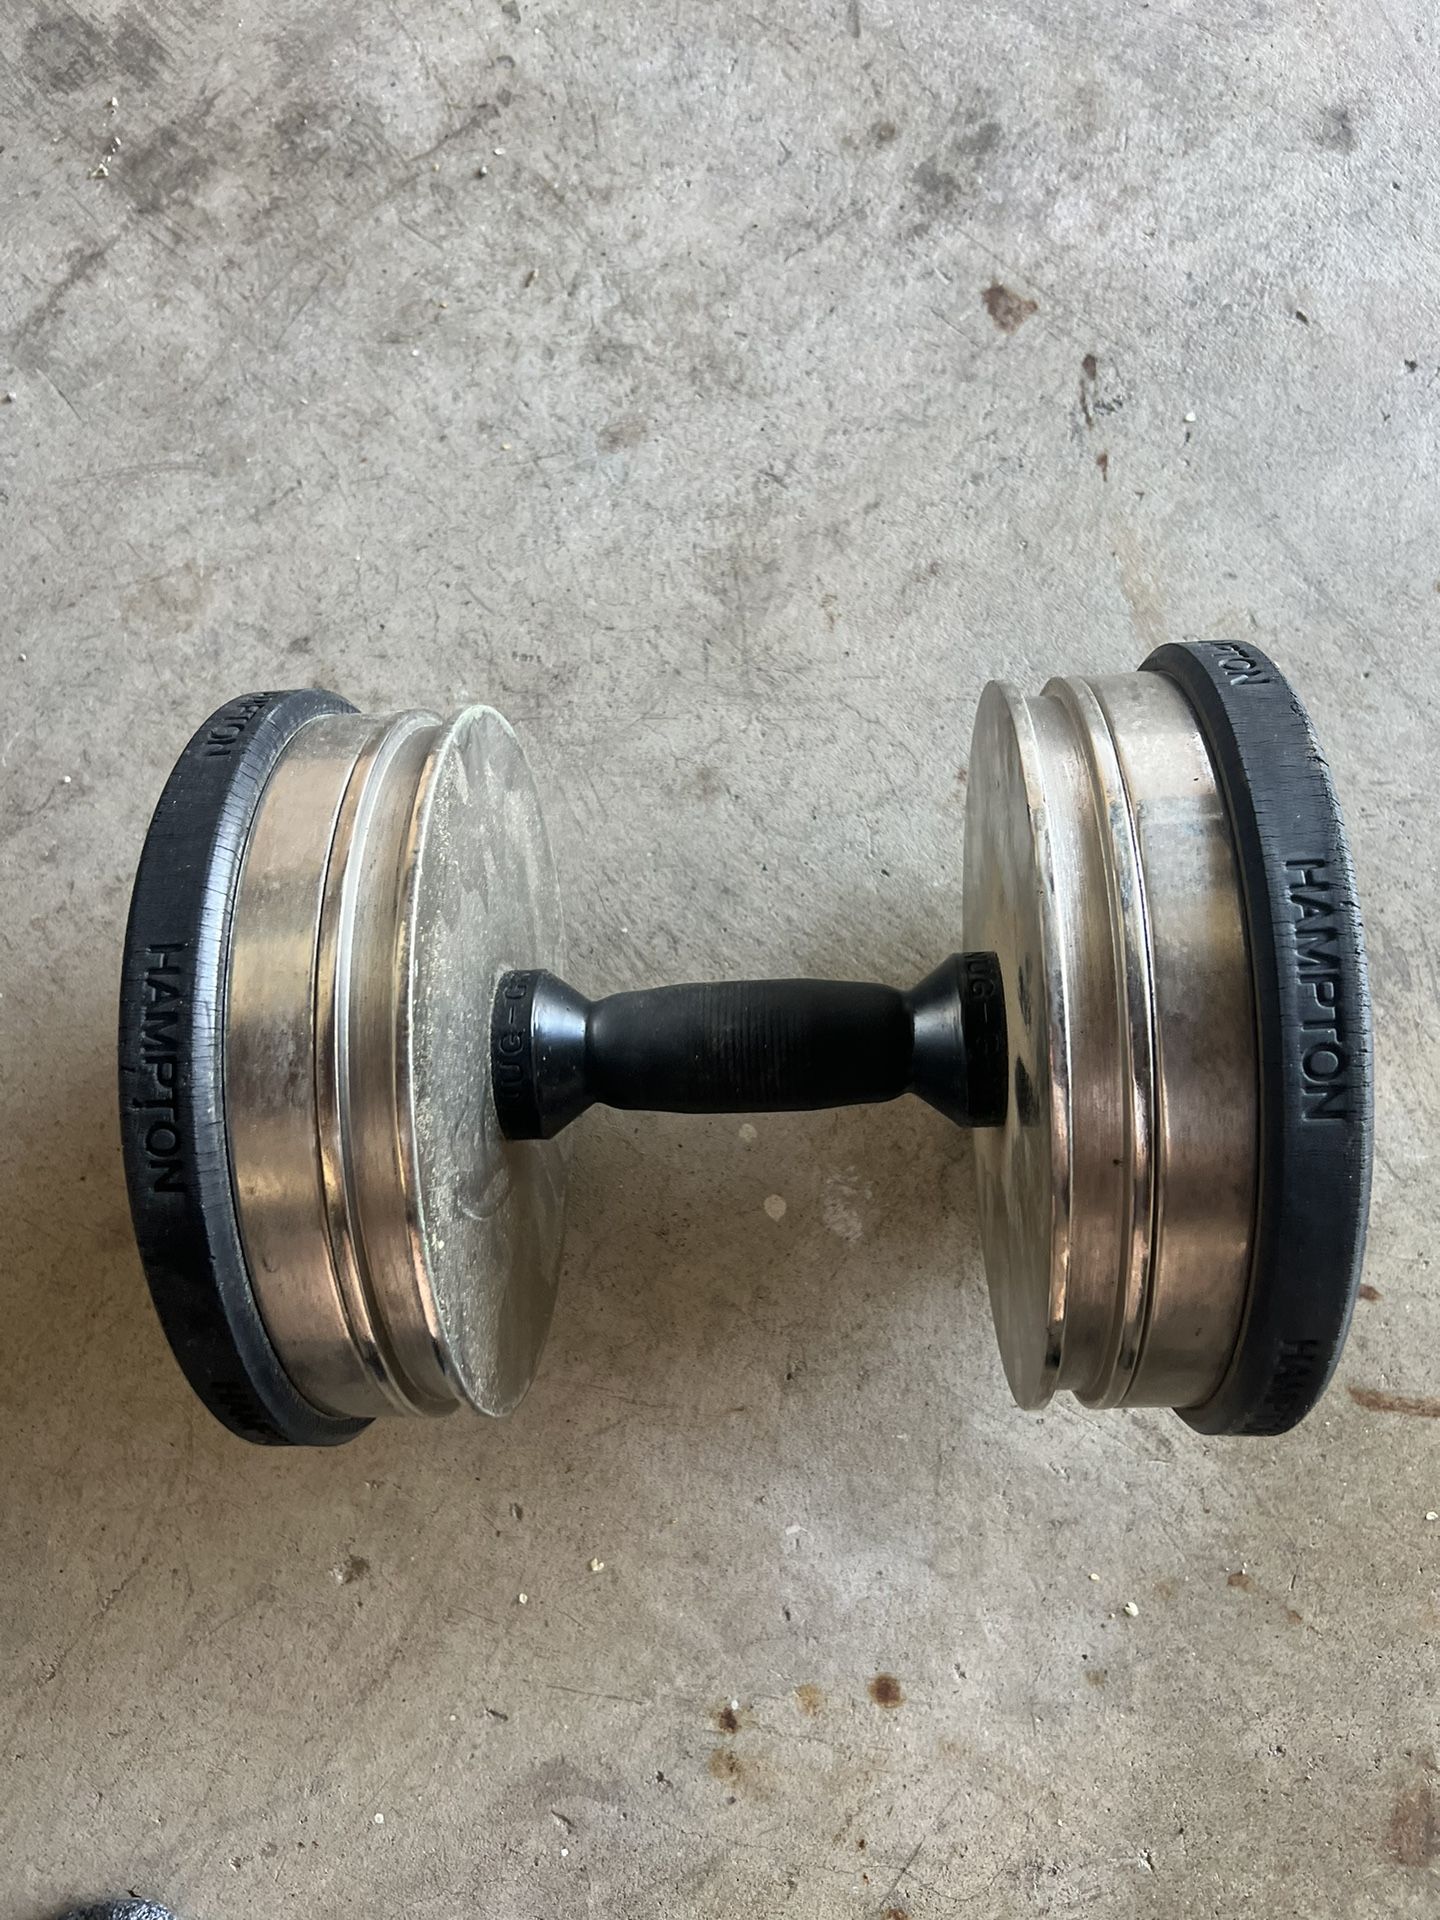 50 Pound Dumbbell Weight 